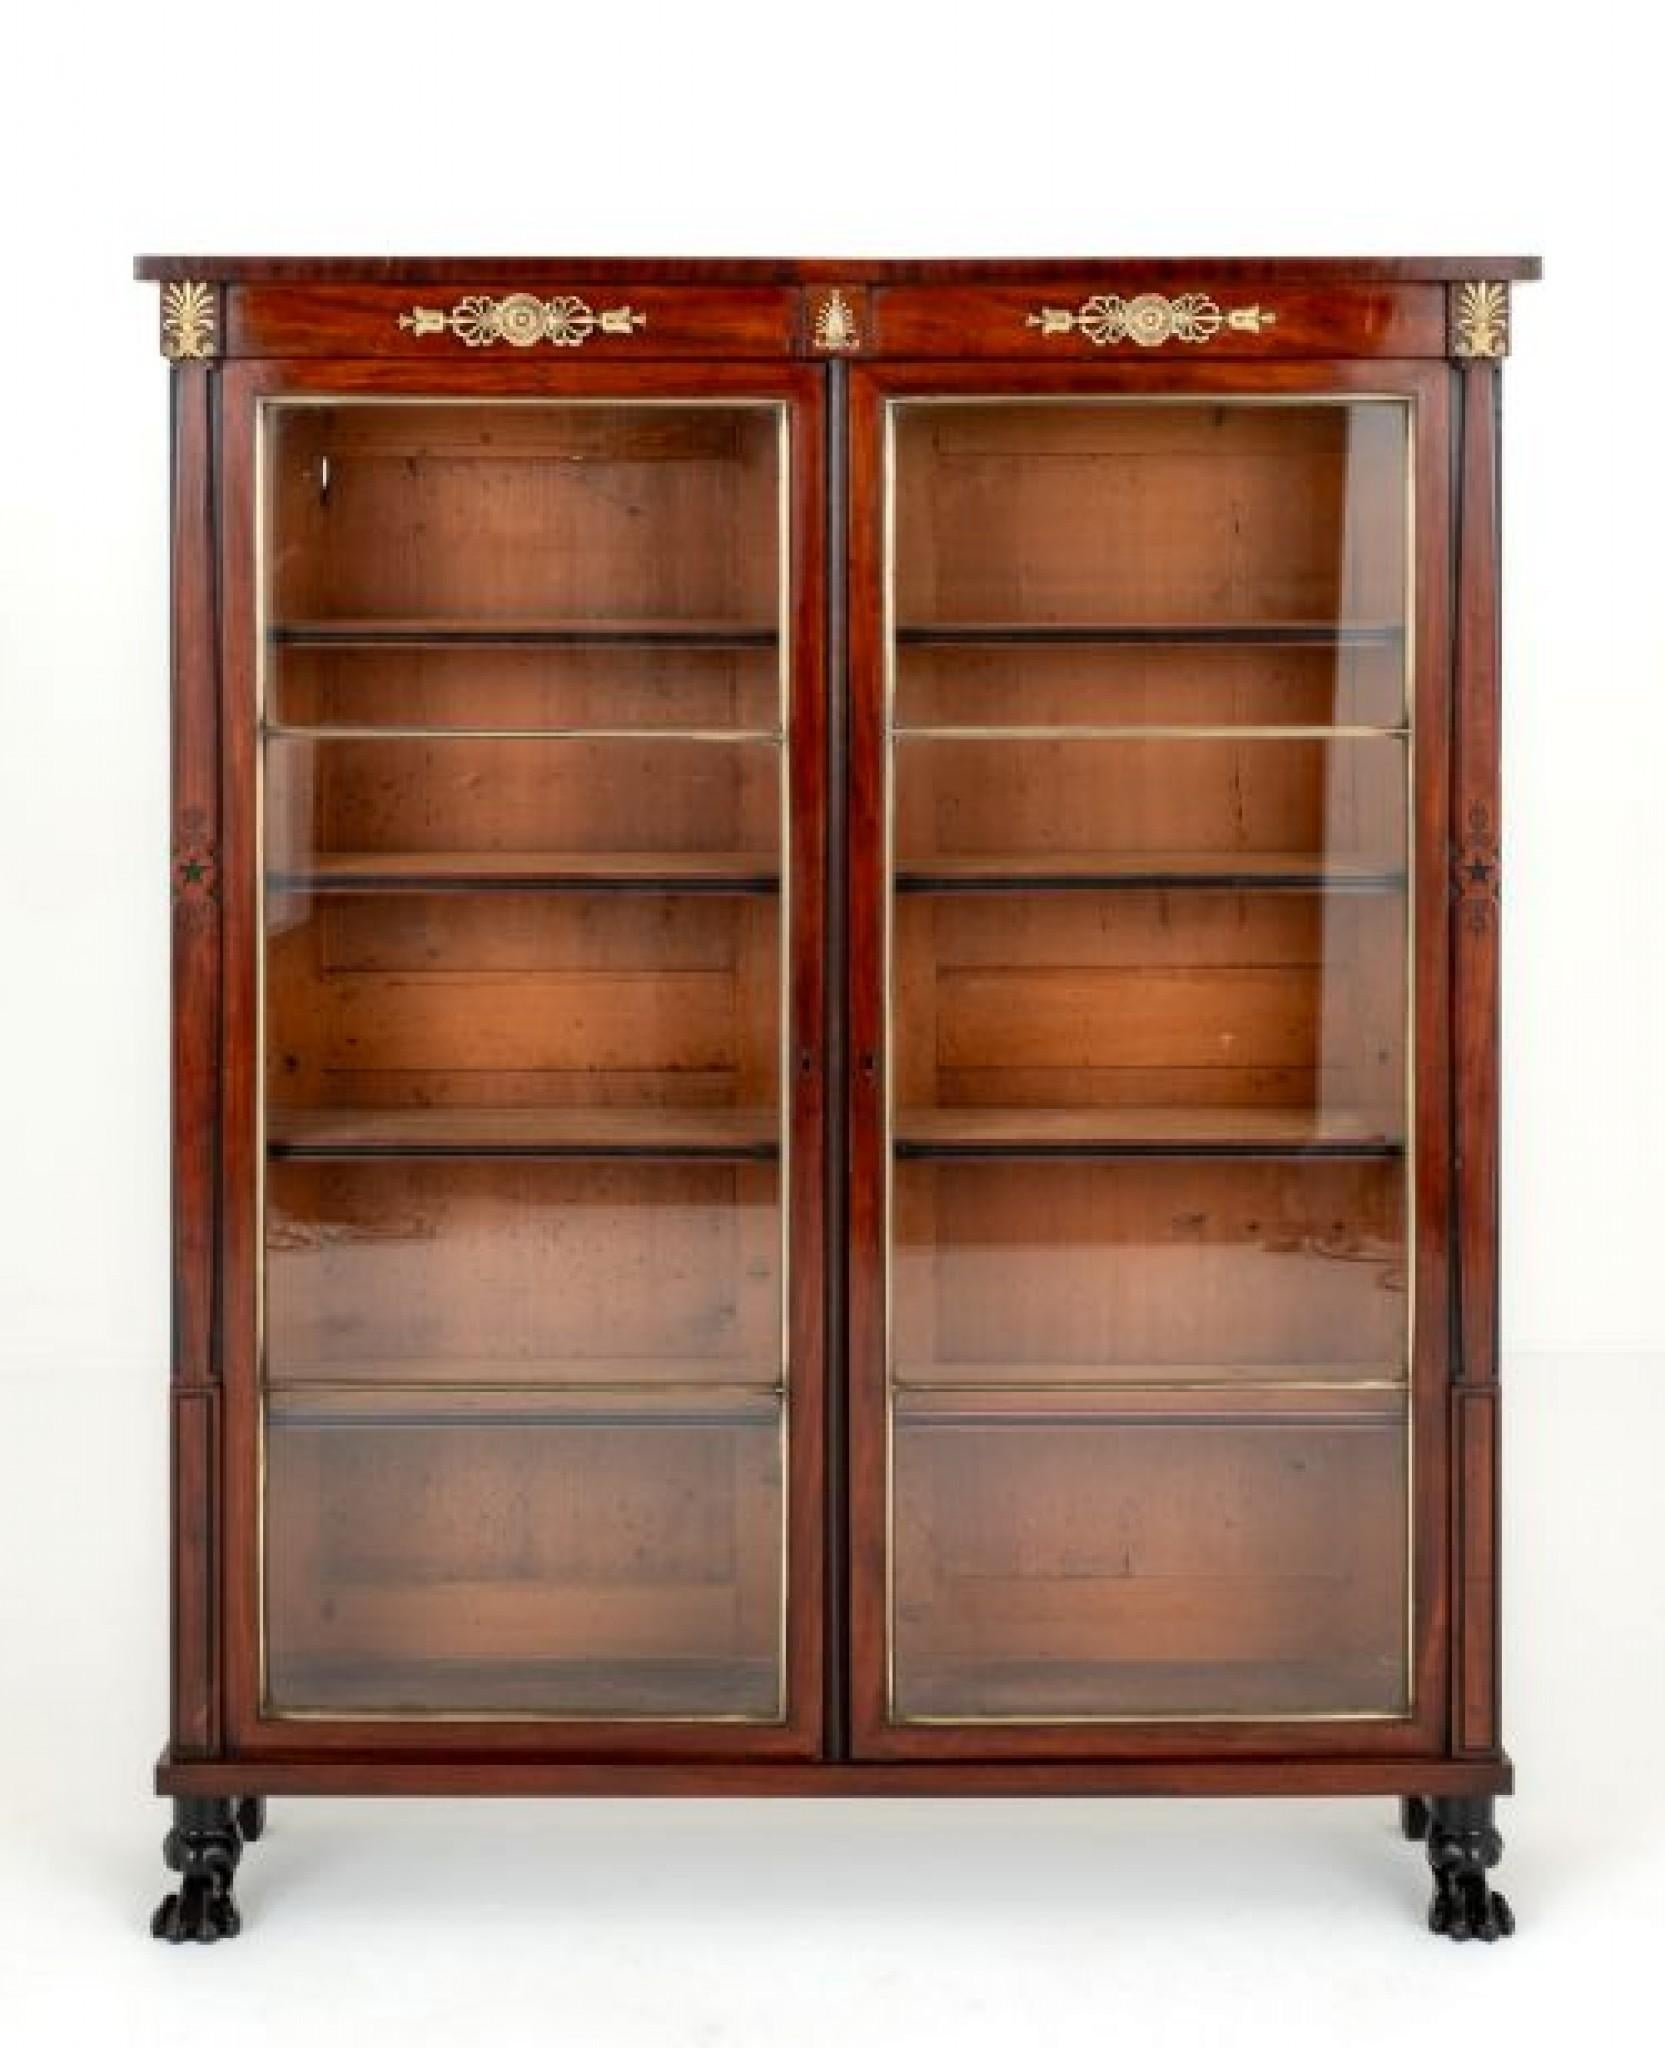 Late 20th Century Regency Bookcase Glazed Cabinet Mahogany Period Antique For Sale